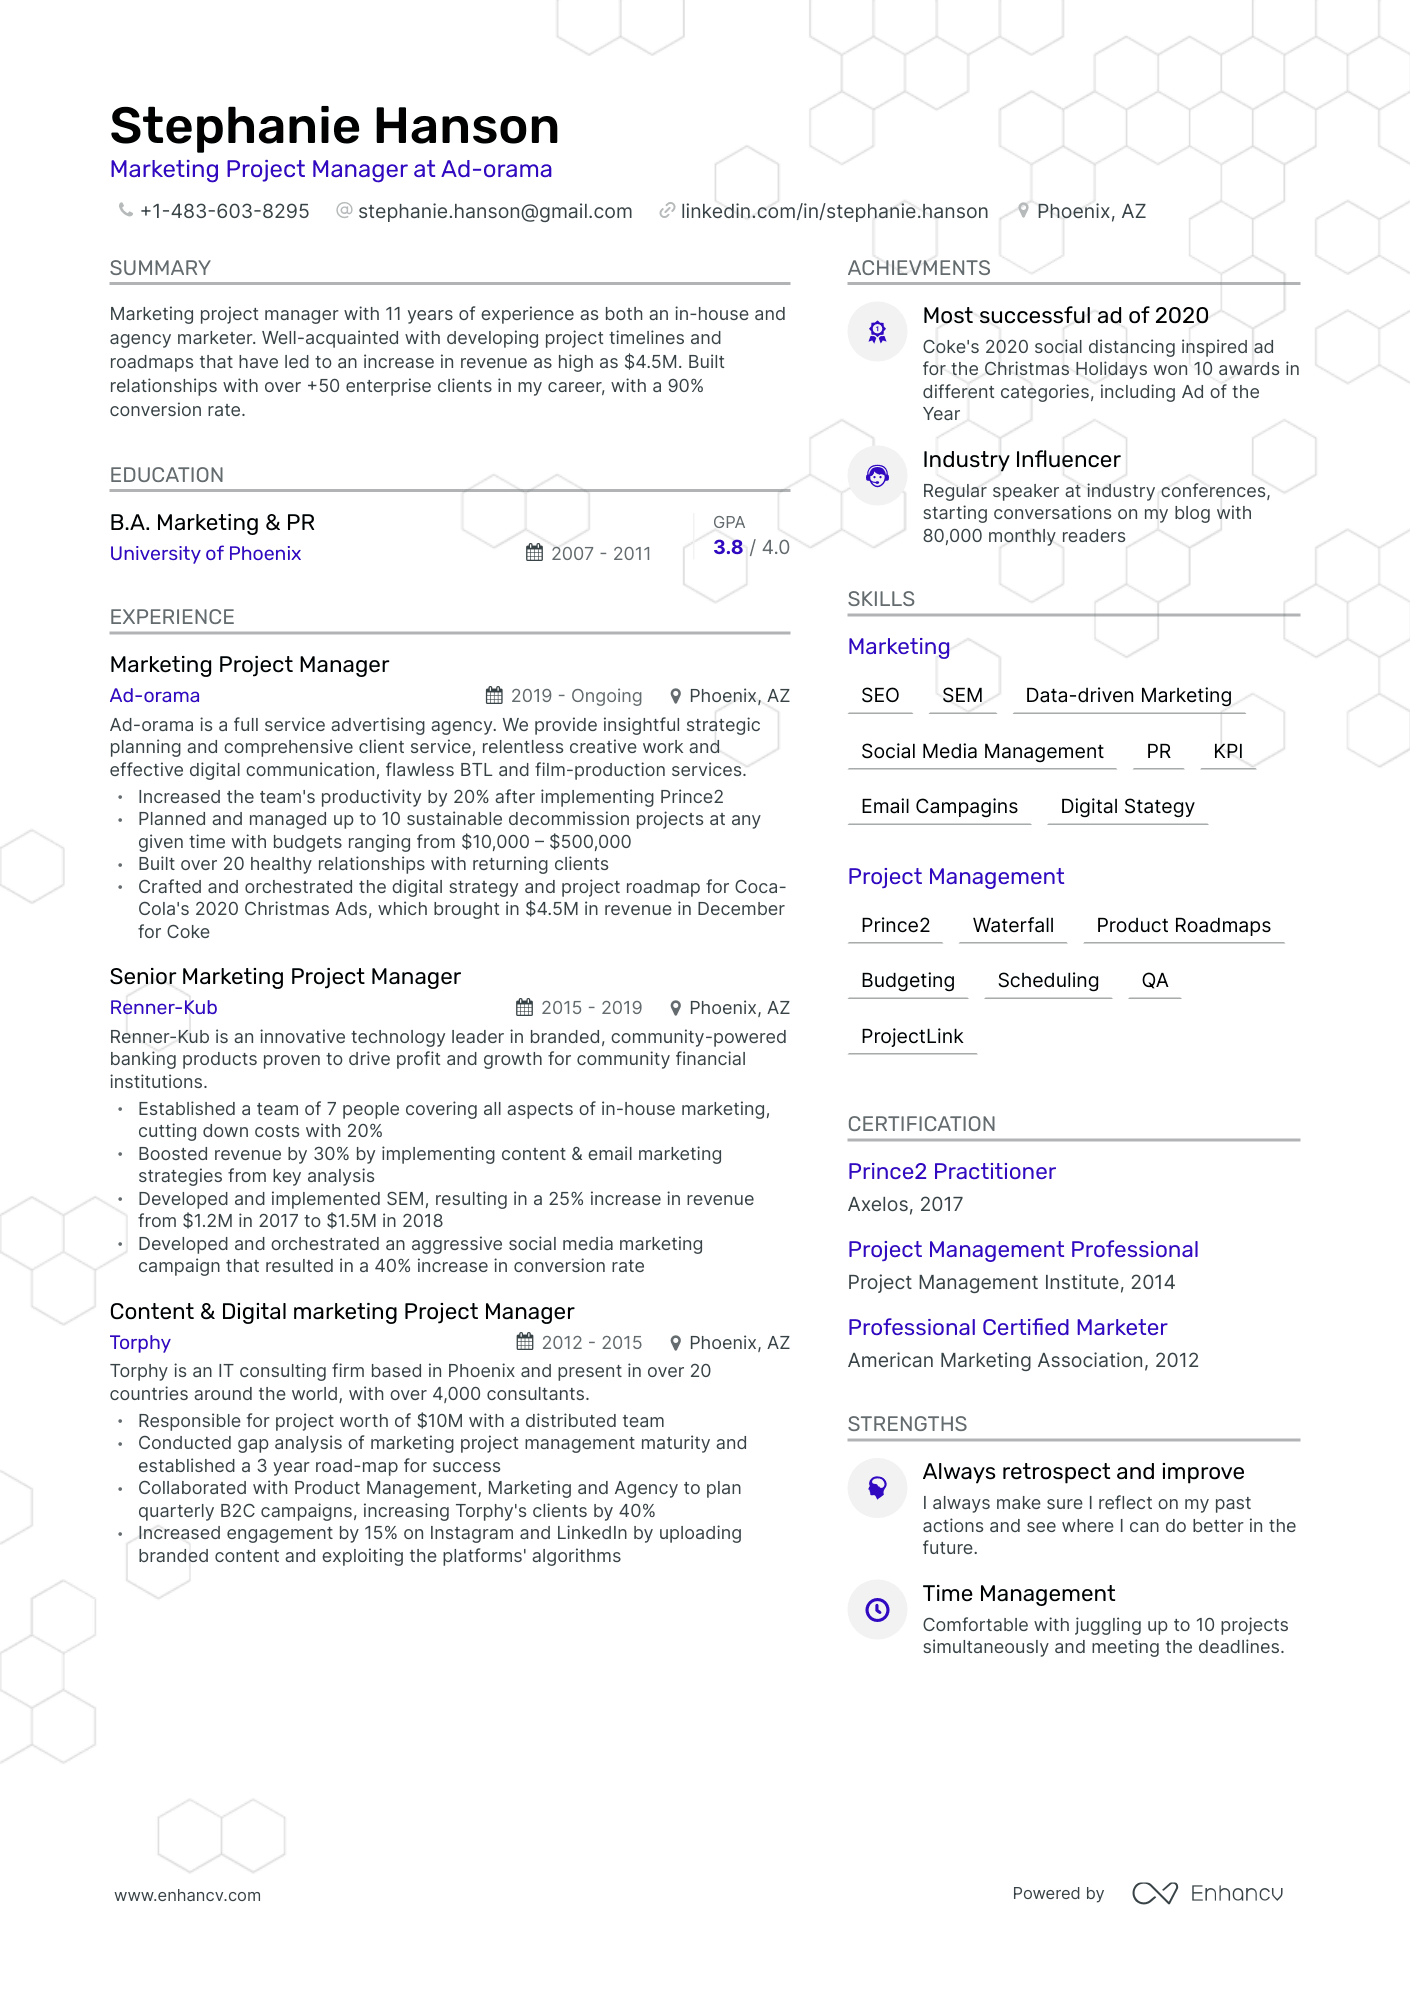 pmp certified project manager resume sample